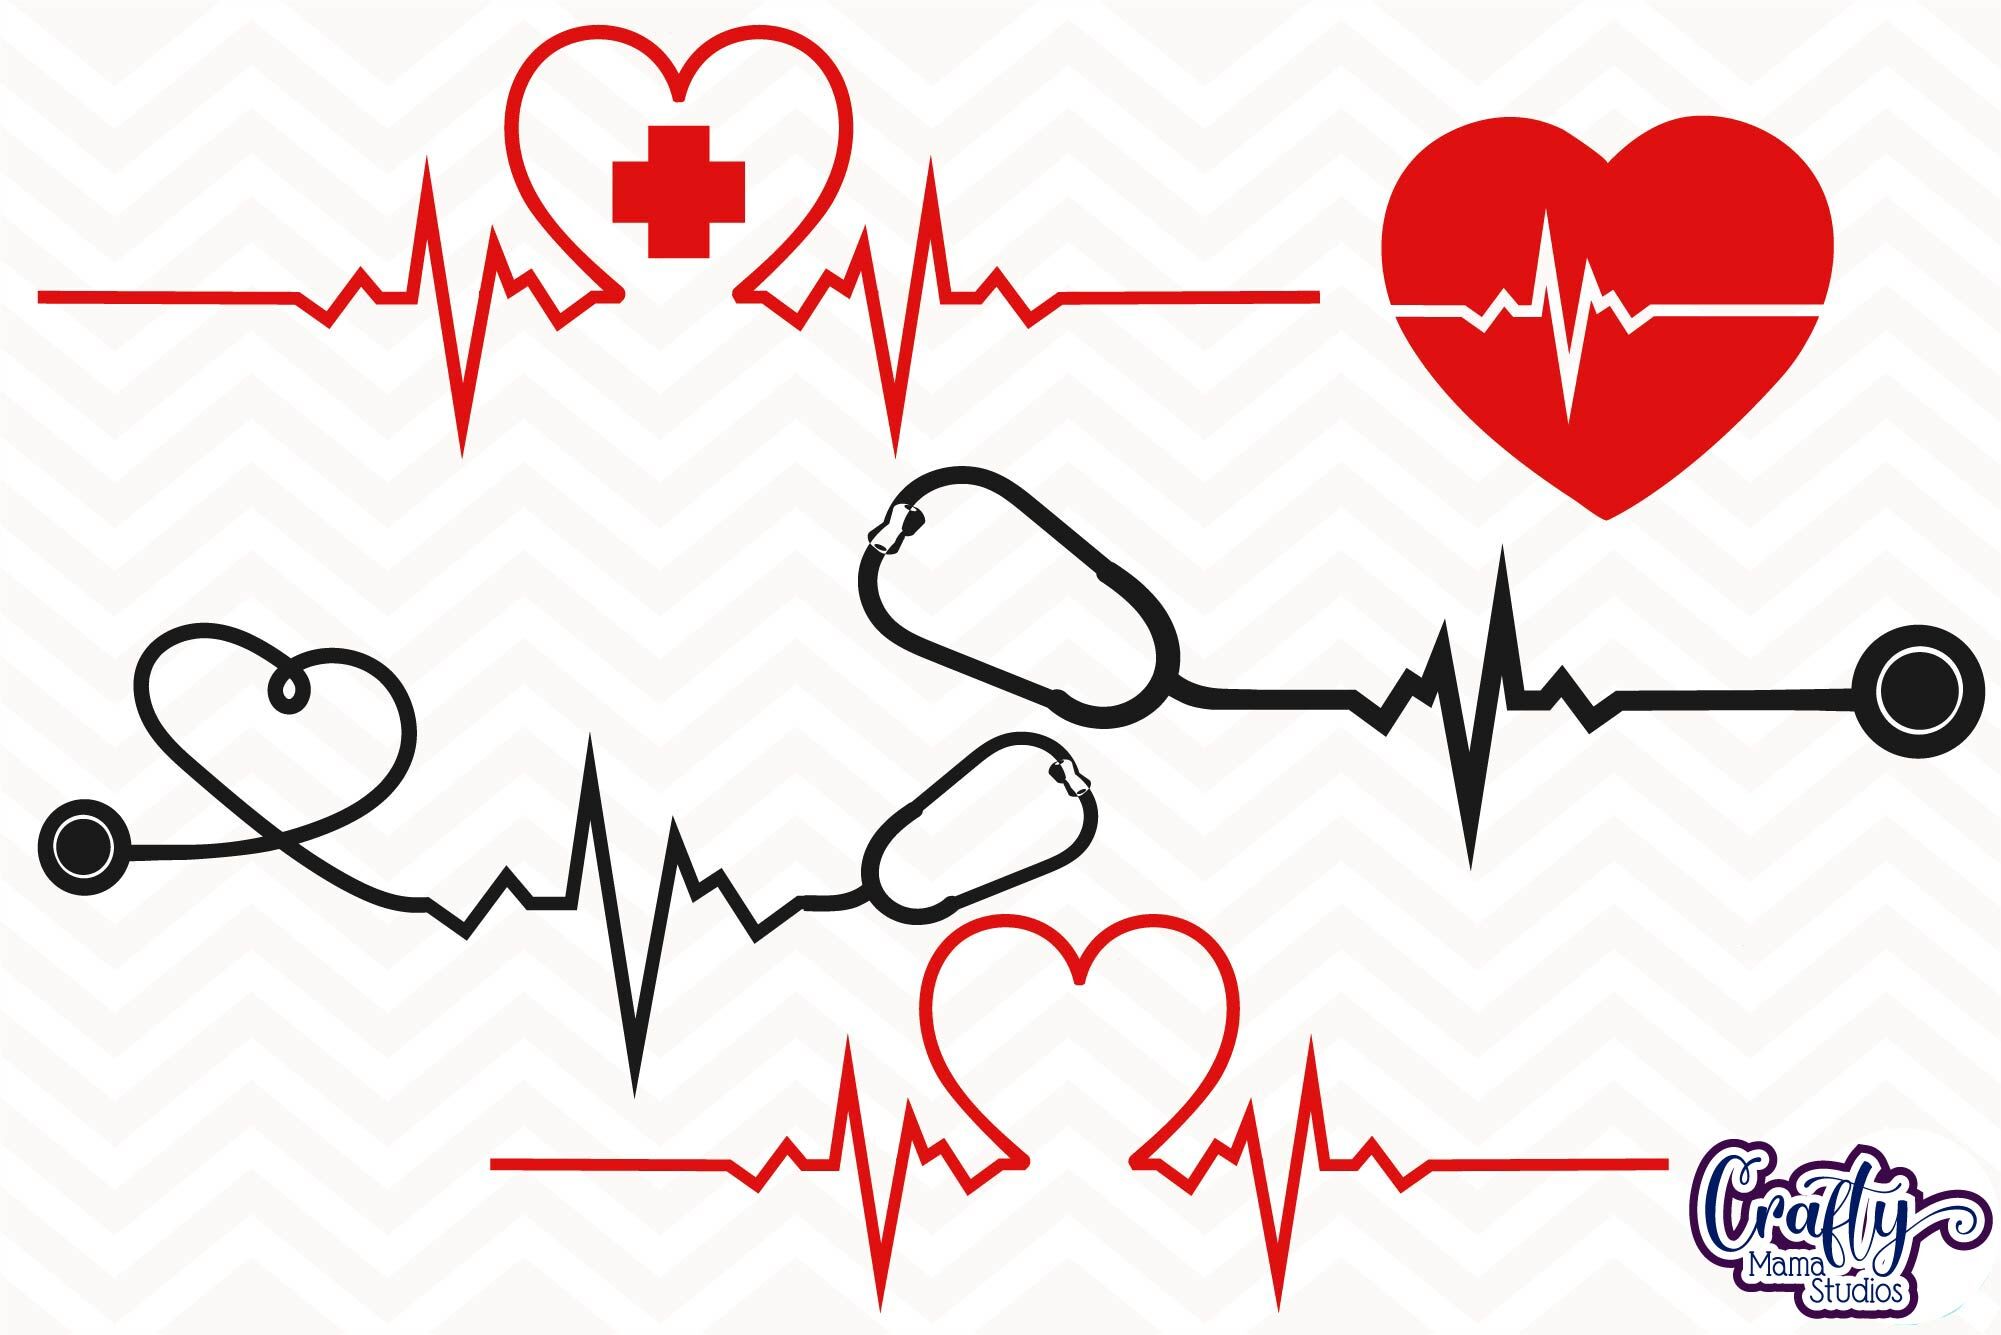 Download Heartbeat Svg Heart Beat Svg Heartbeat Clipart Pulse Svg By Crafty Mama Studios Thehungryjpeg Com